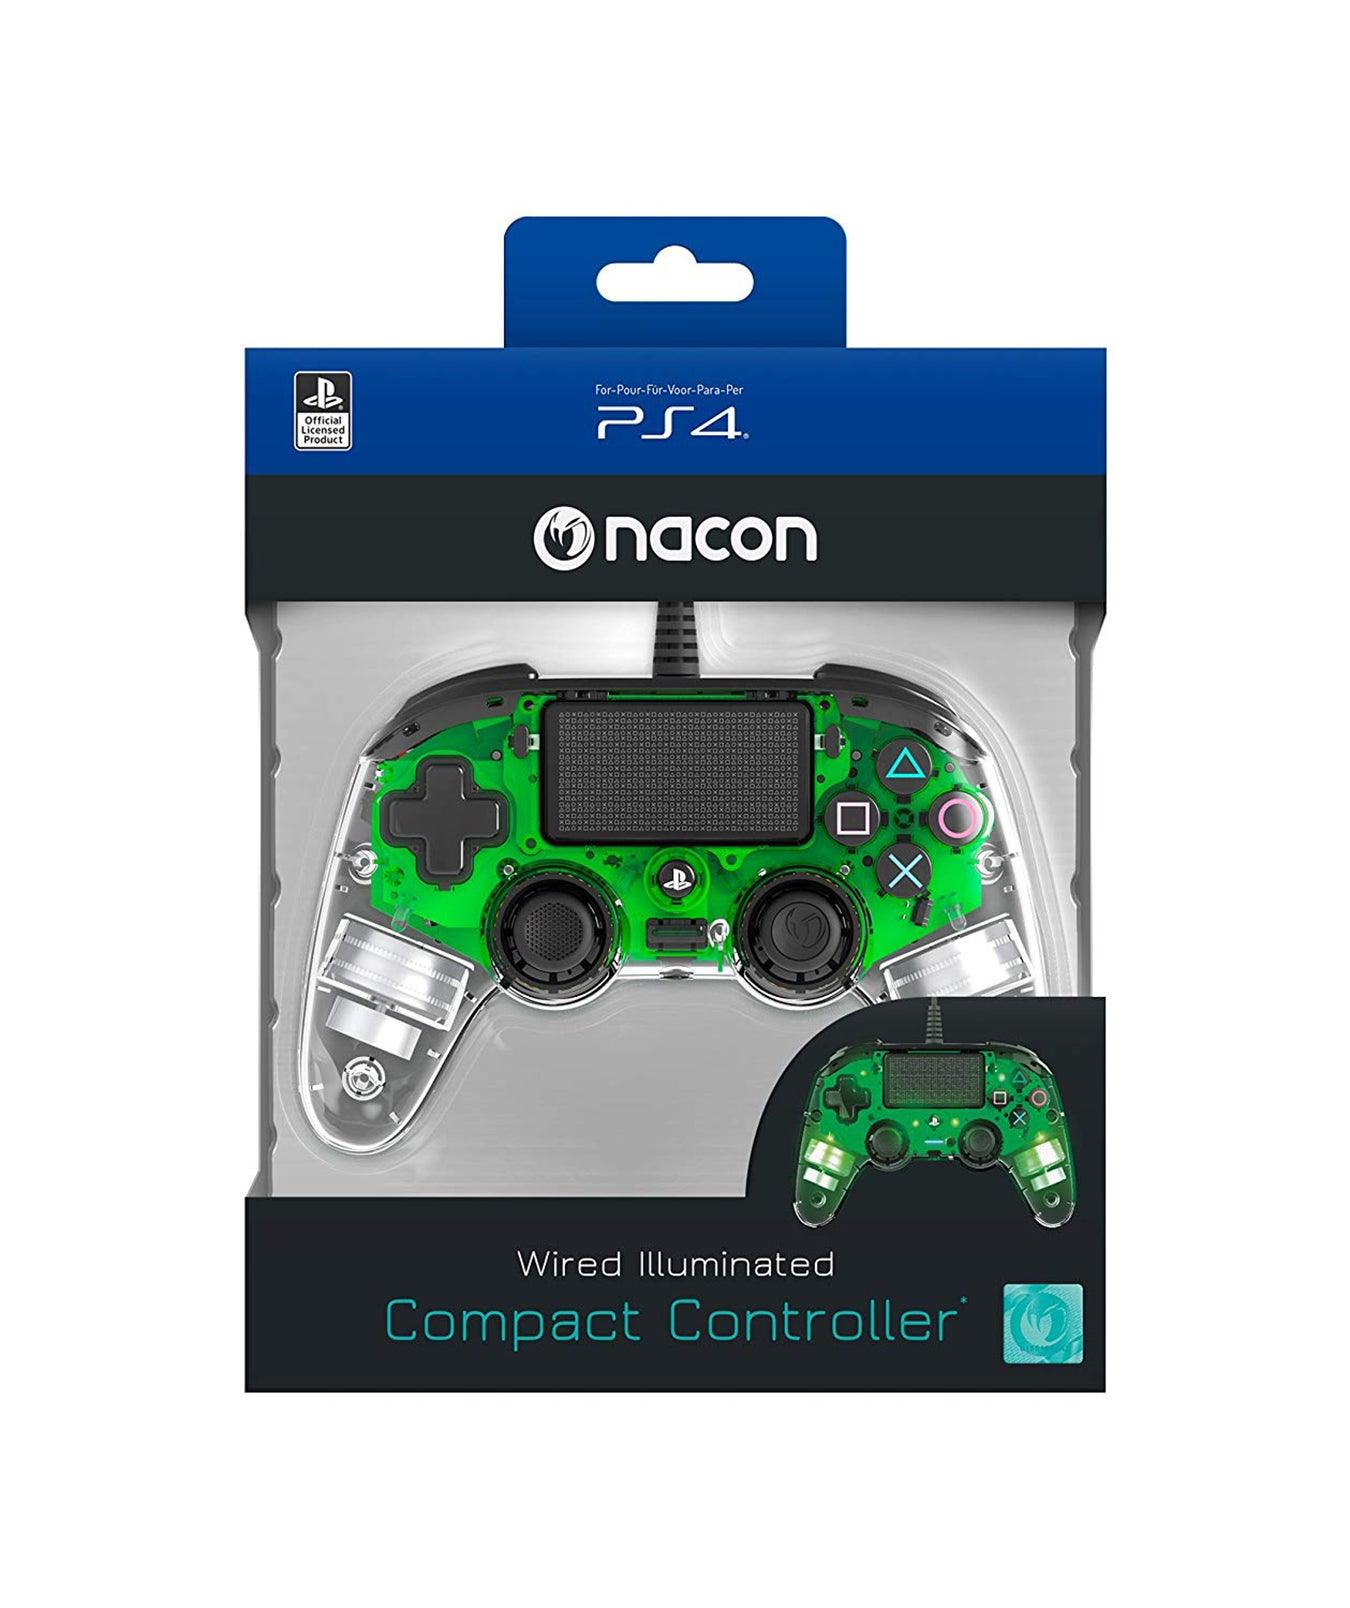 Nacon Ps4 Compact Ctrl Grn Le - Want a New Gadget